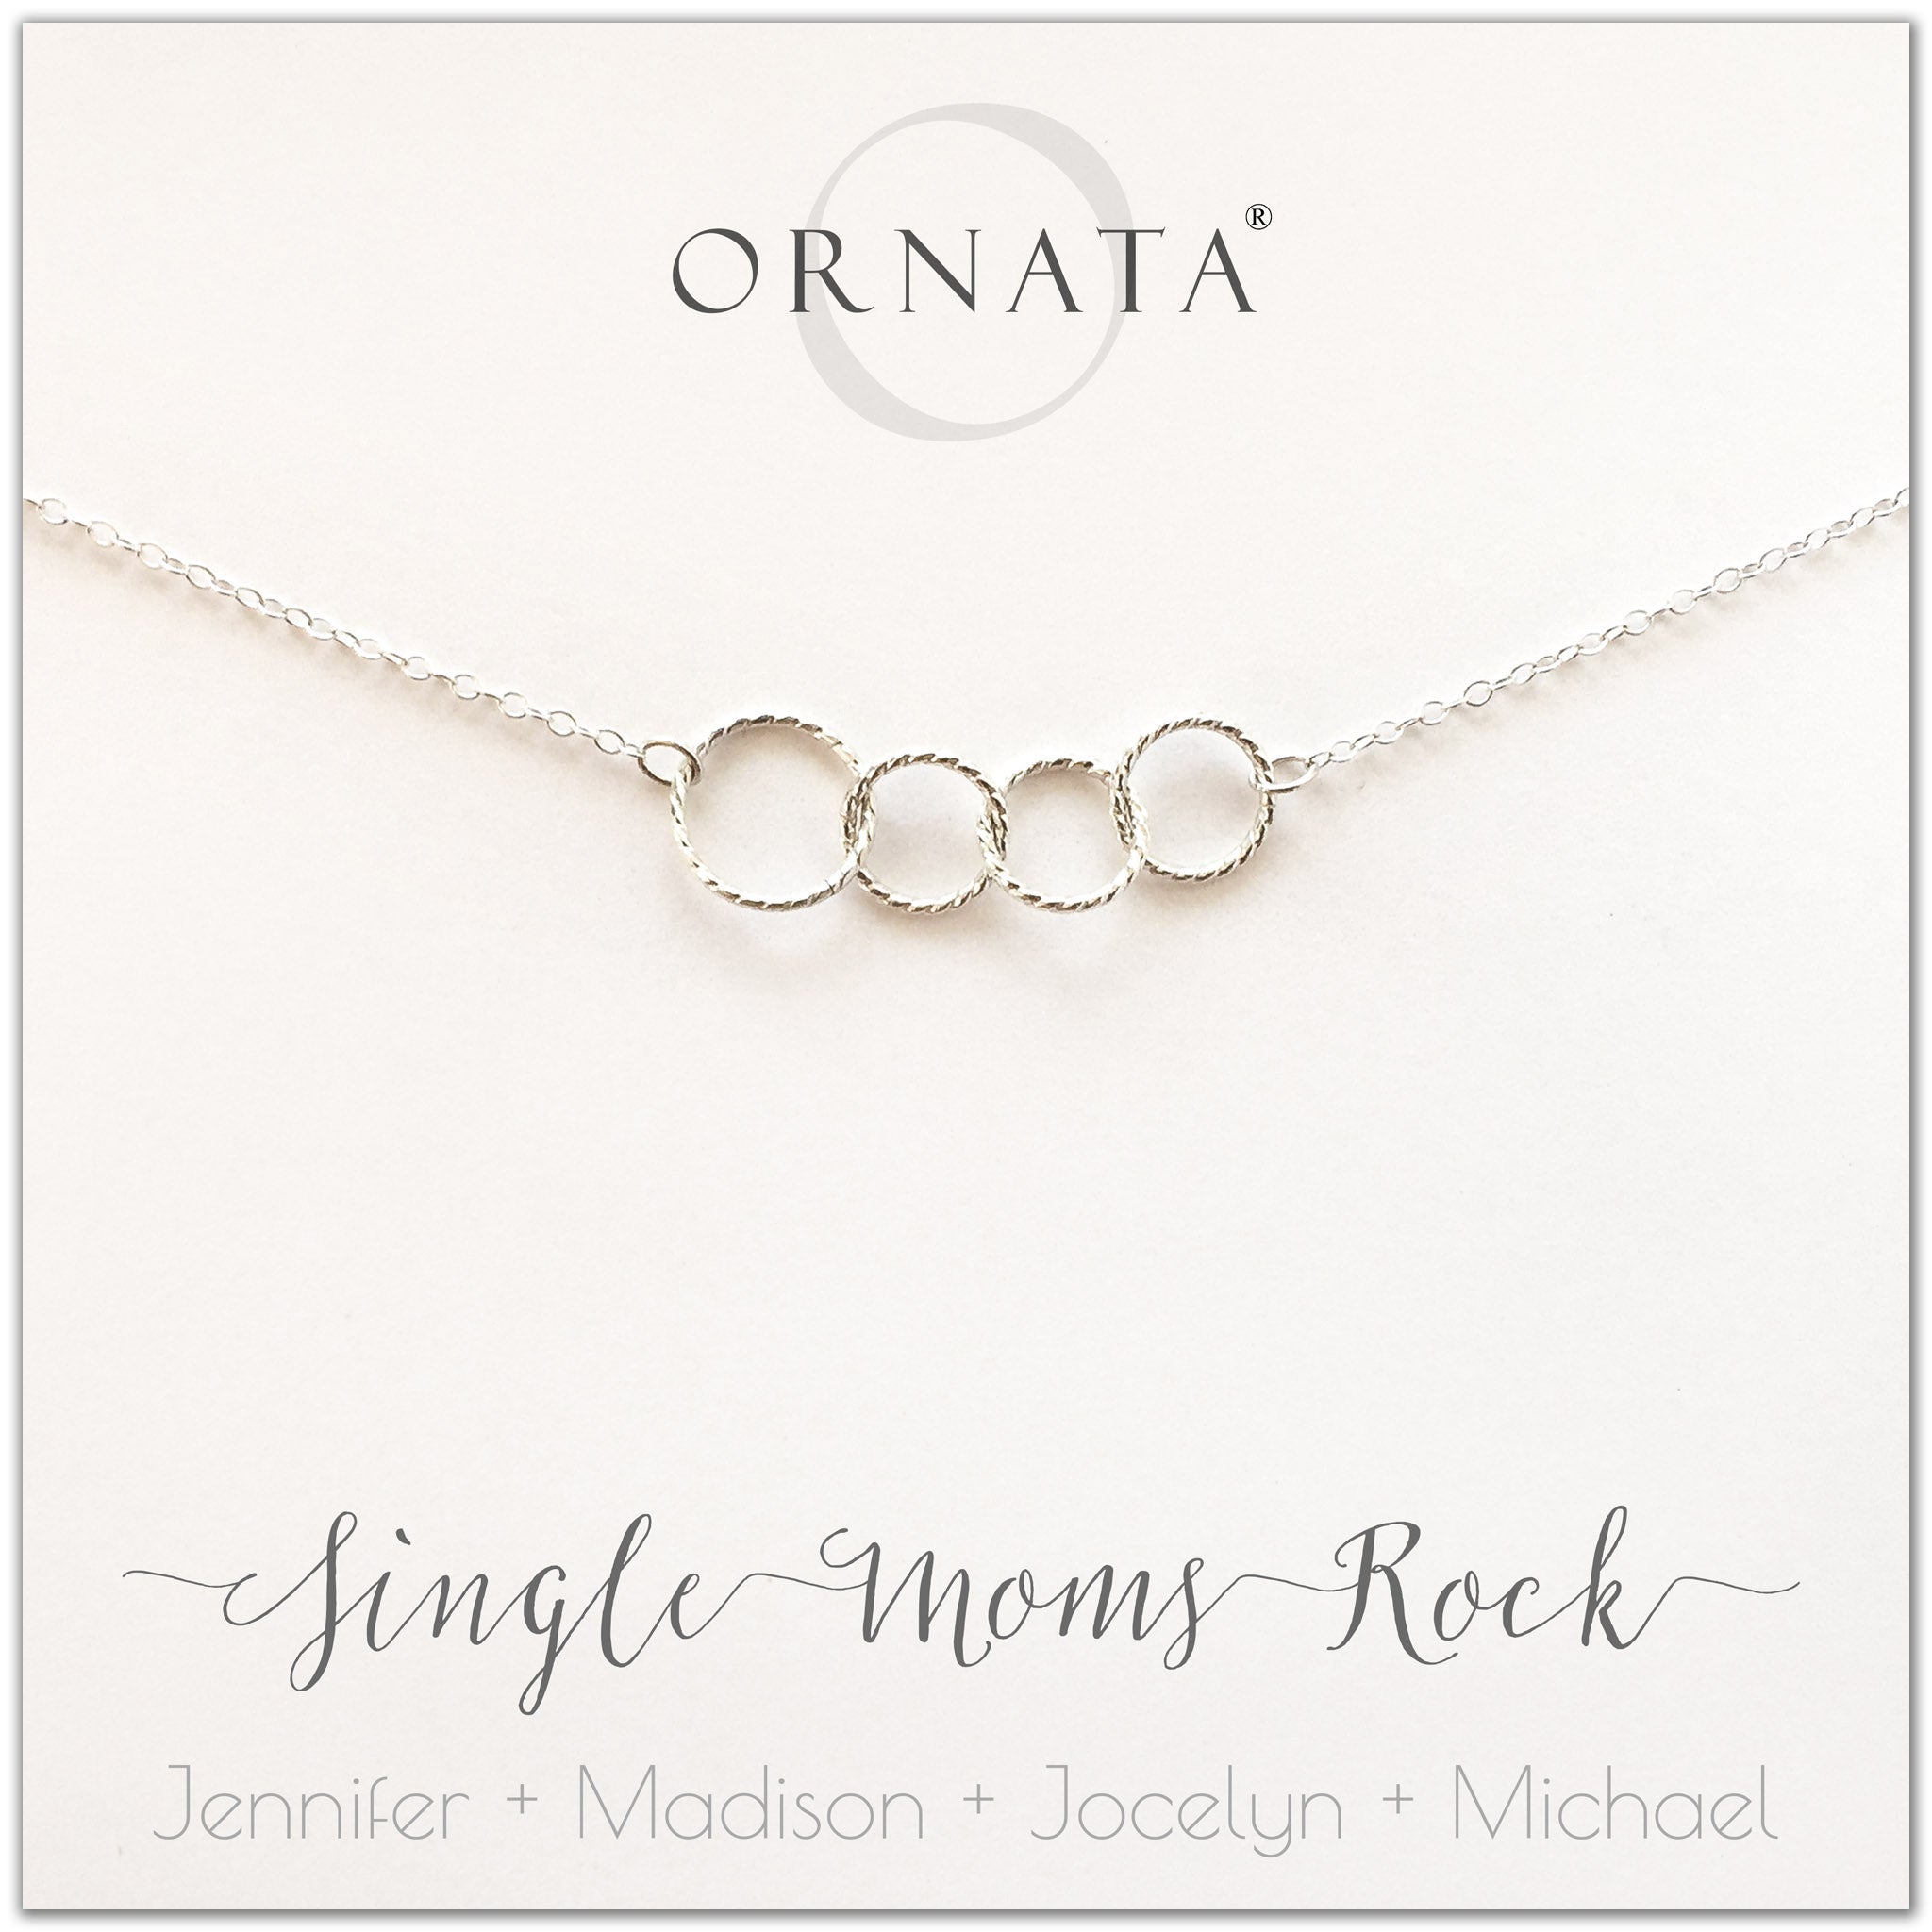 Single Moms Rock - personalized single mother necklace. Our sterling silver custom jewelry is a perfect gift for single mothers to symbolize strength, love, and unity. Great gift for Mother’s Day or an anytime present for your favorite mom. 